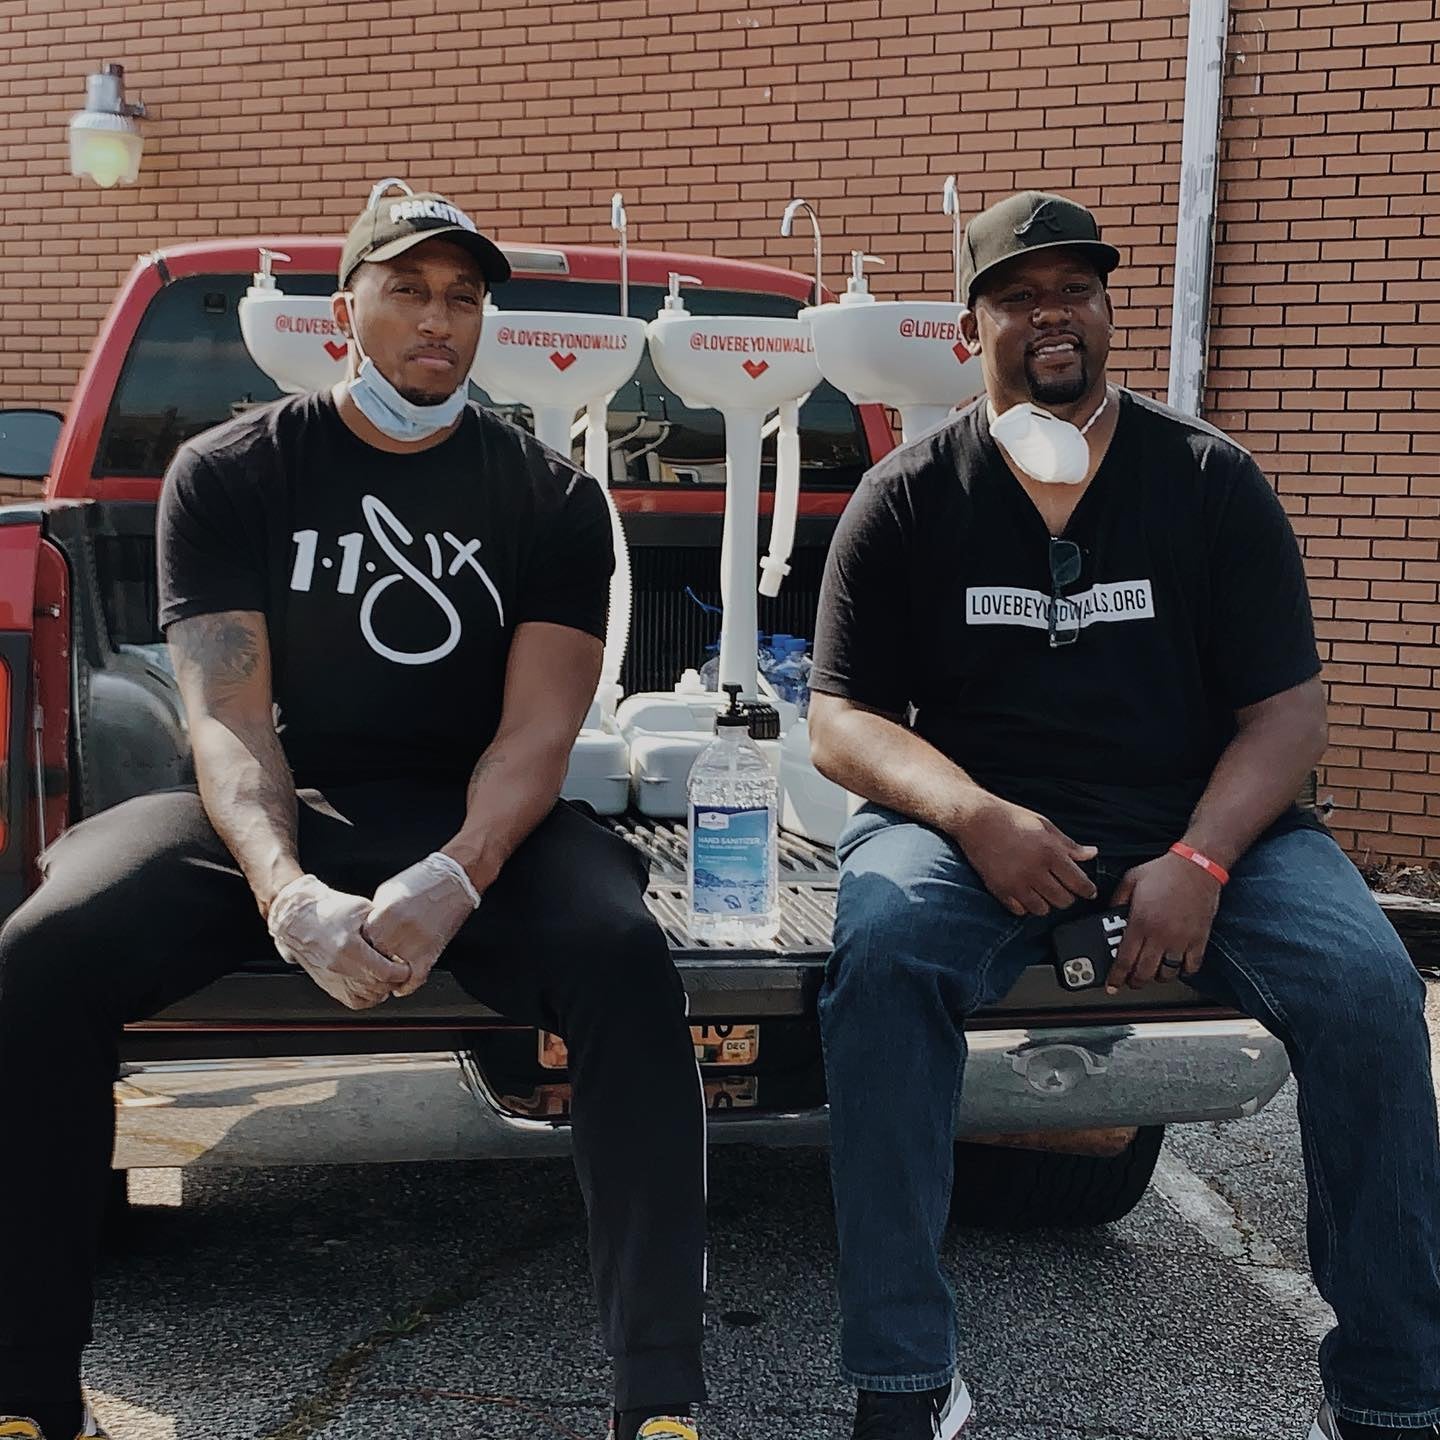 This Nonprofit Is Providing Handwashing Sinks For The Homeless Community